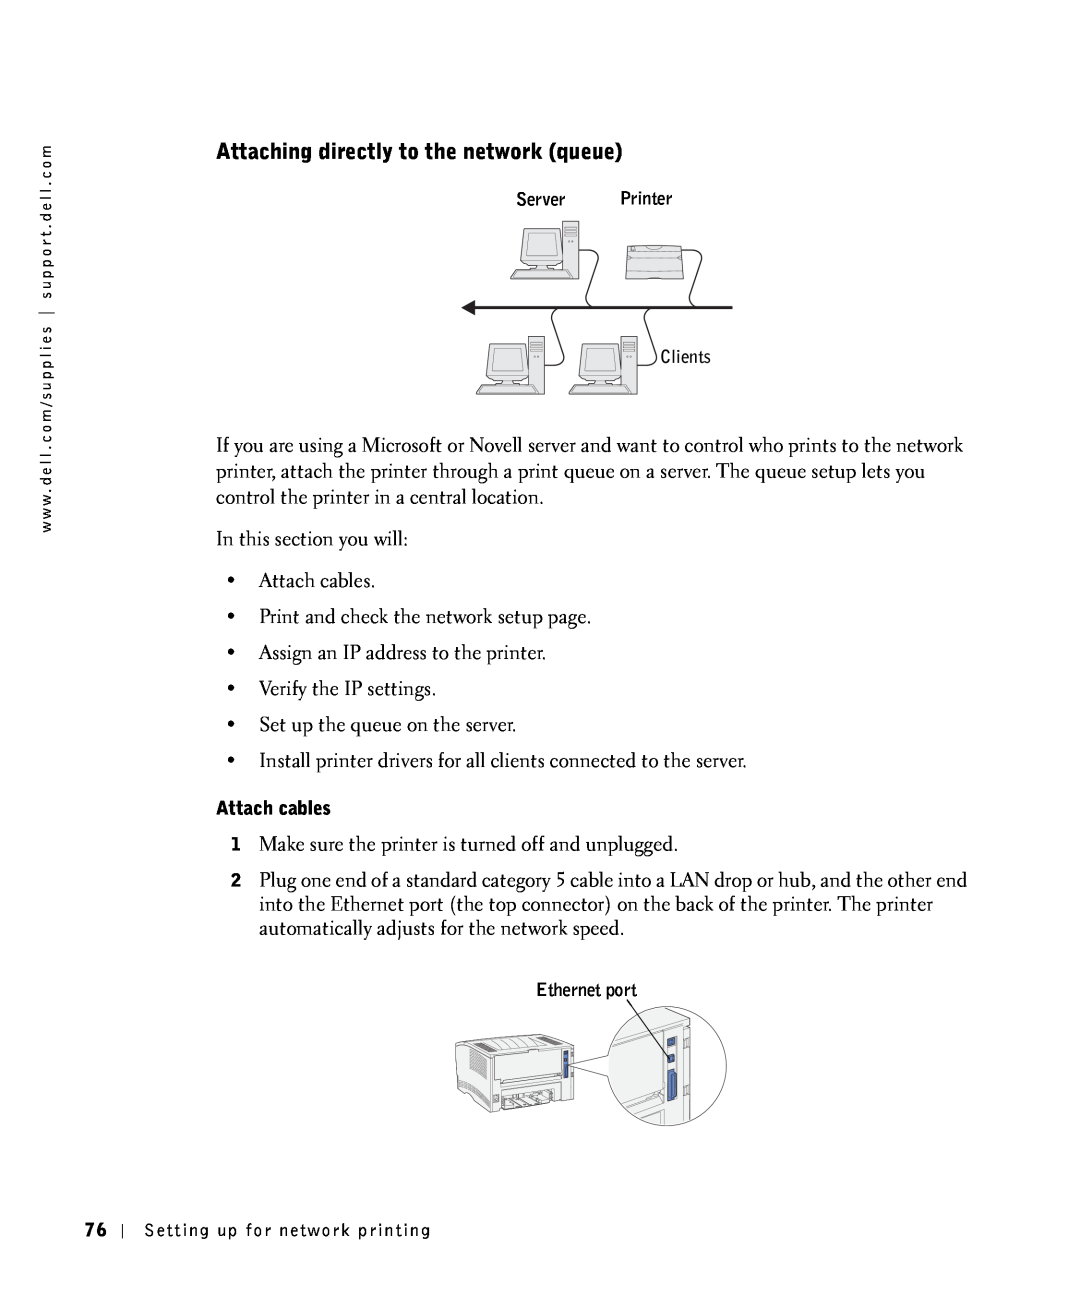 Dell S2500 owner manual Attaching directly to the network queue, Attach cables 